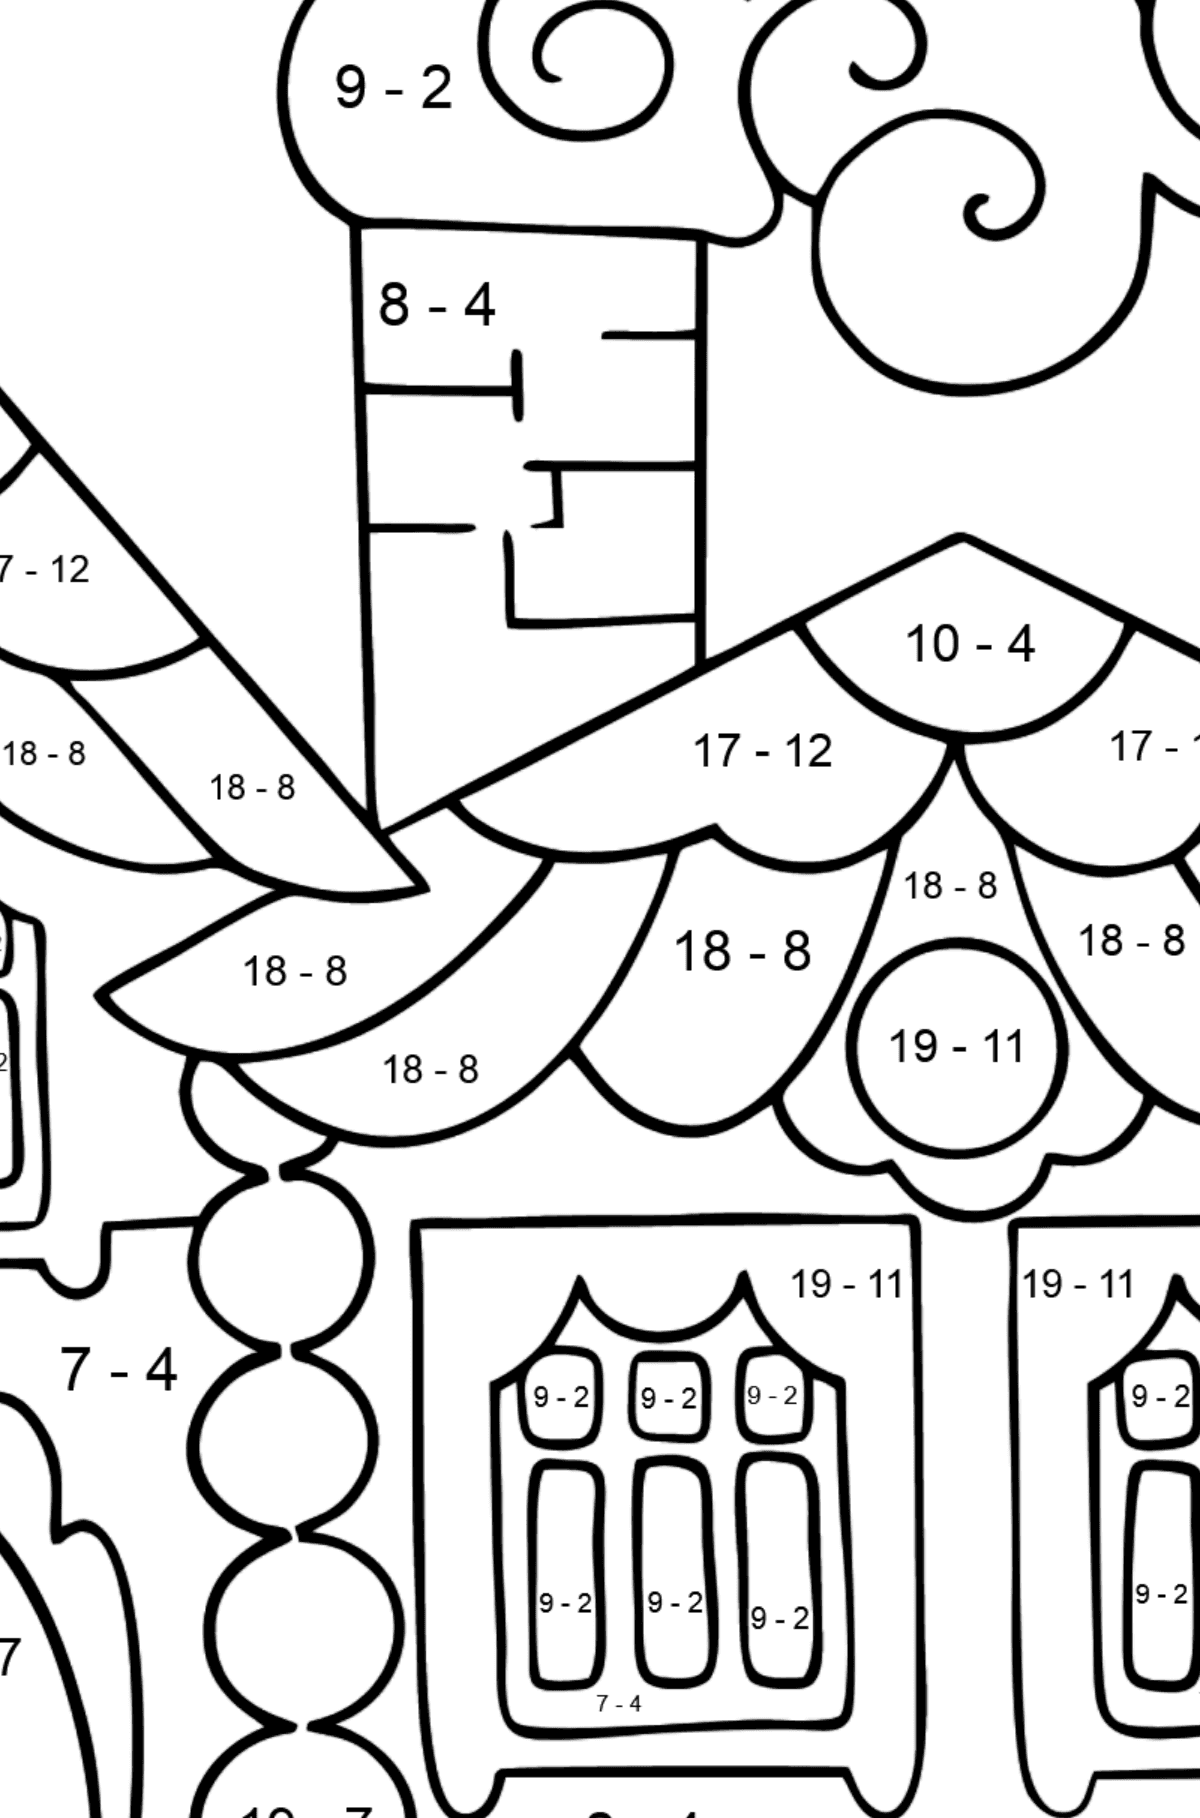 House in the Forest Coloring Page (difficult) - Math Coloring - Subtraction for Kids